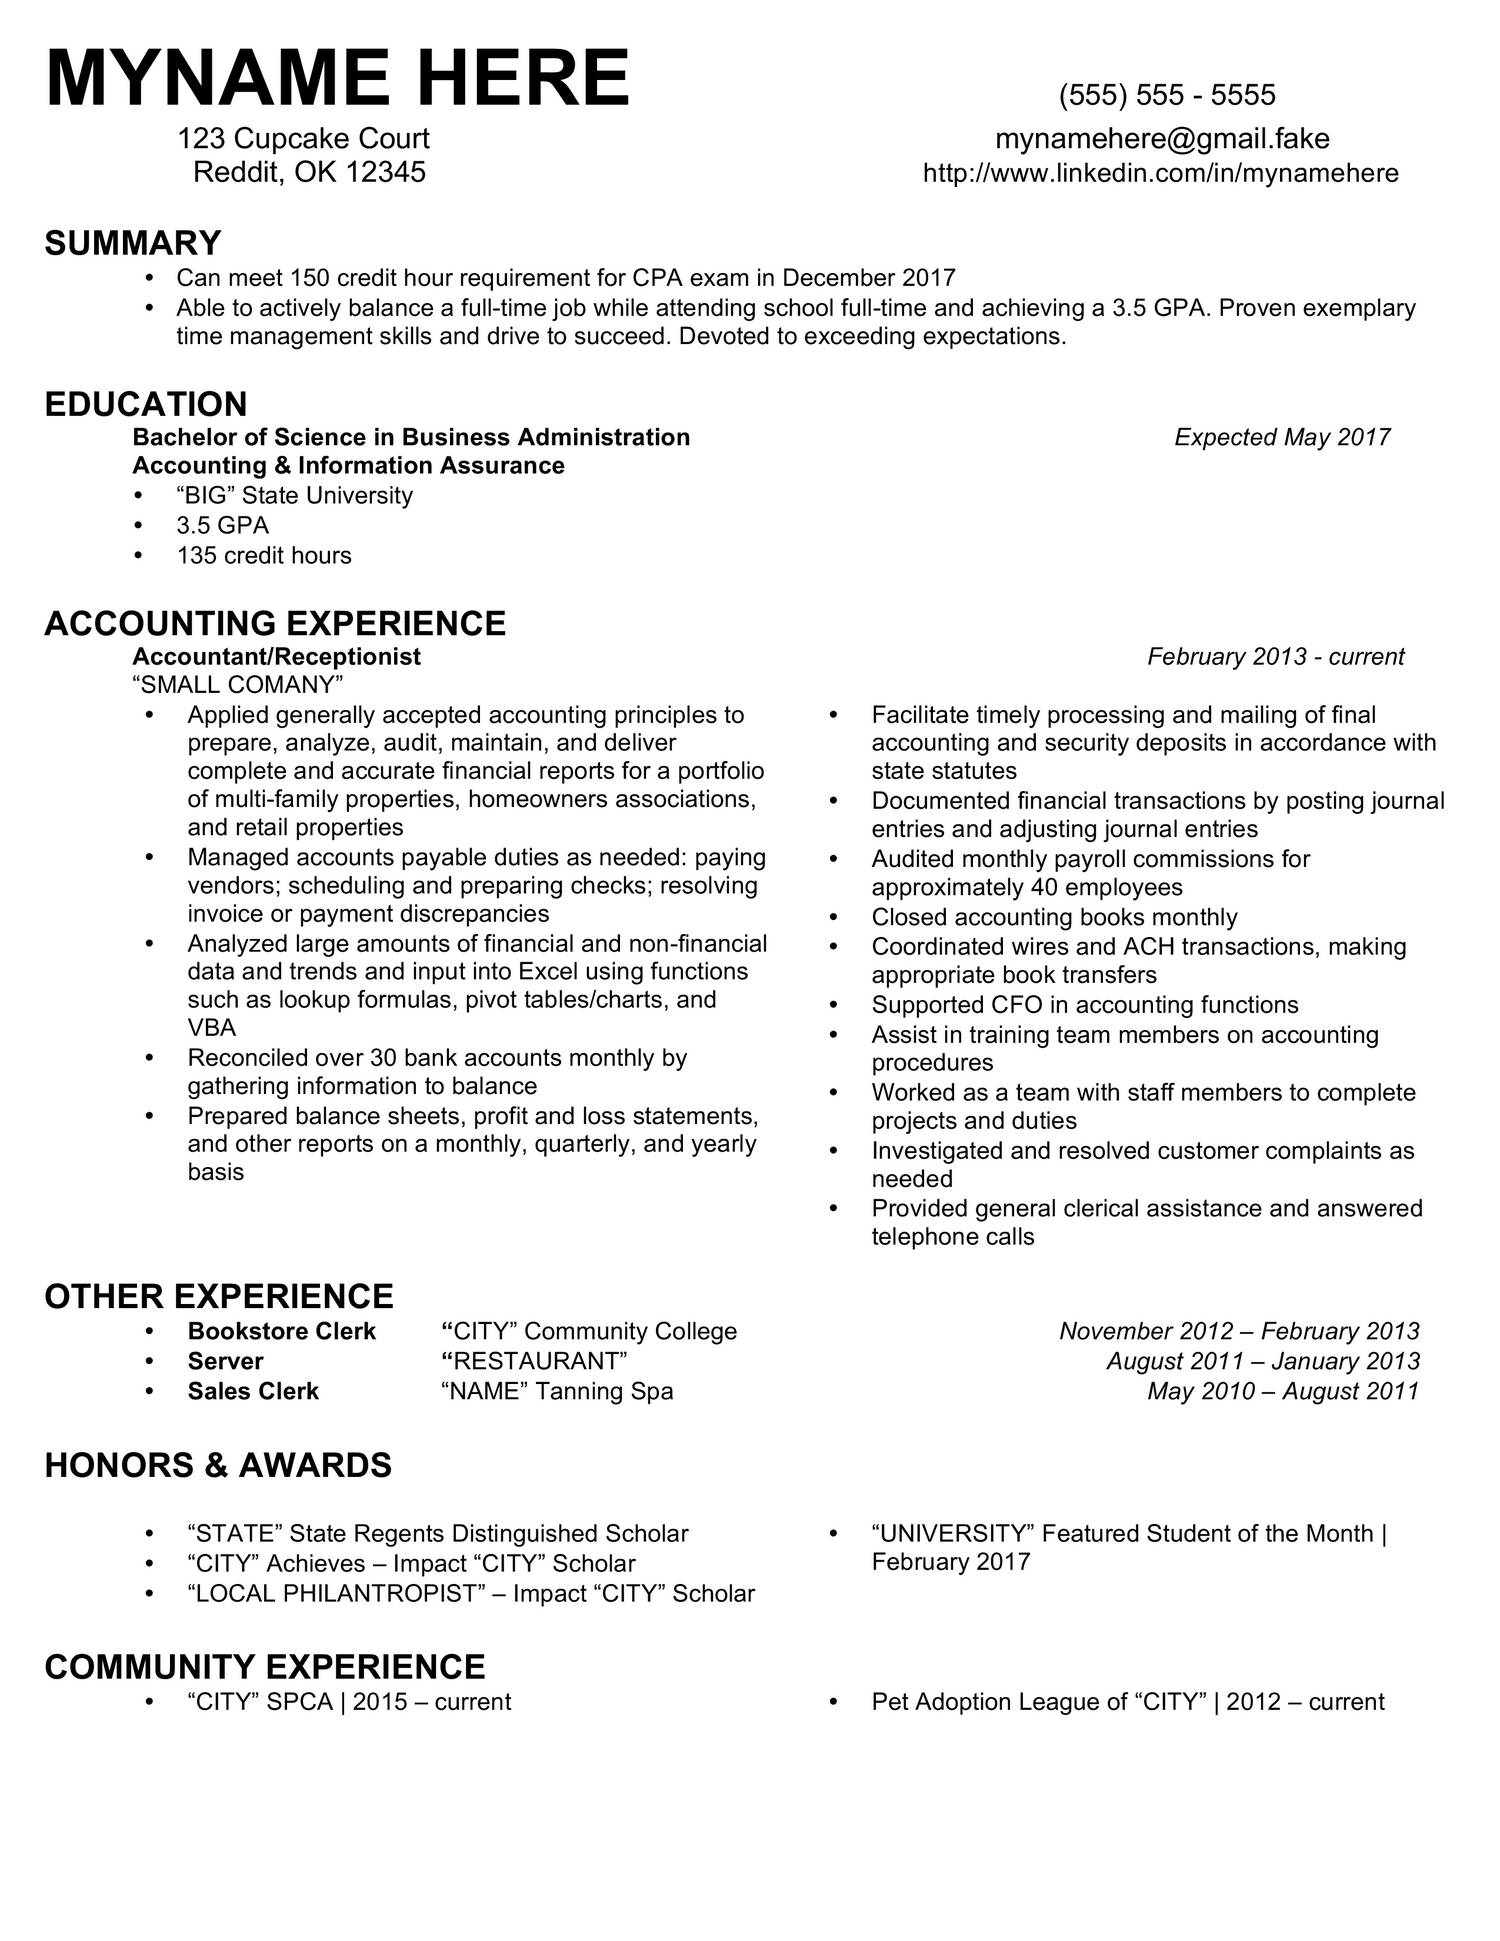 ACCOUNTING RESUME.pdf DocDroid